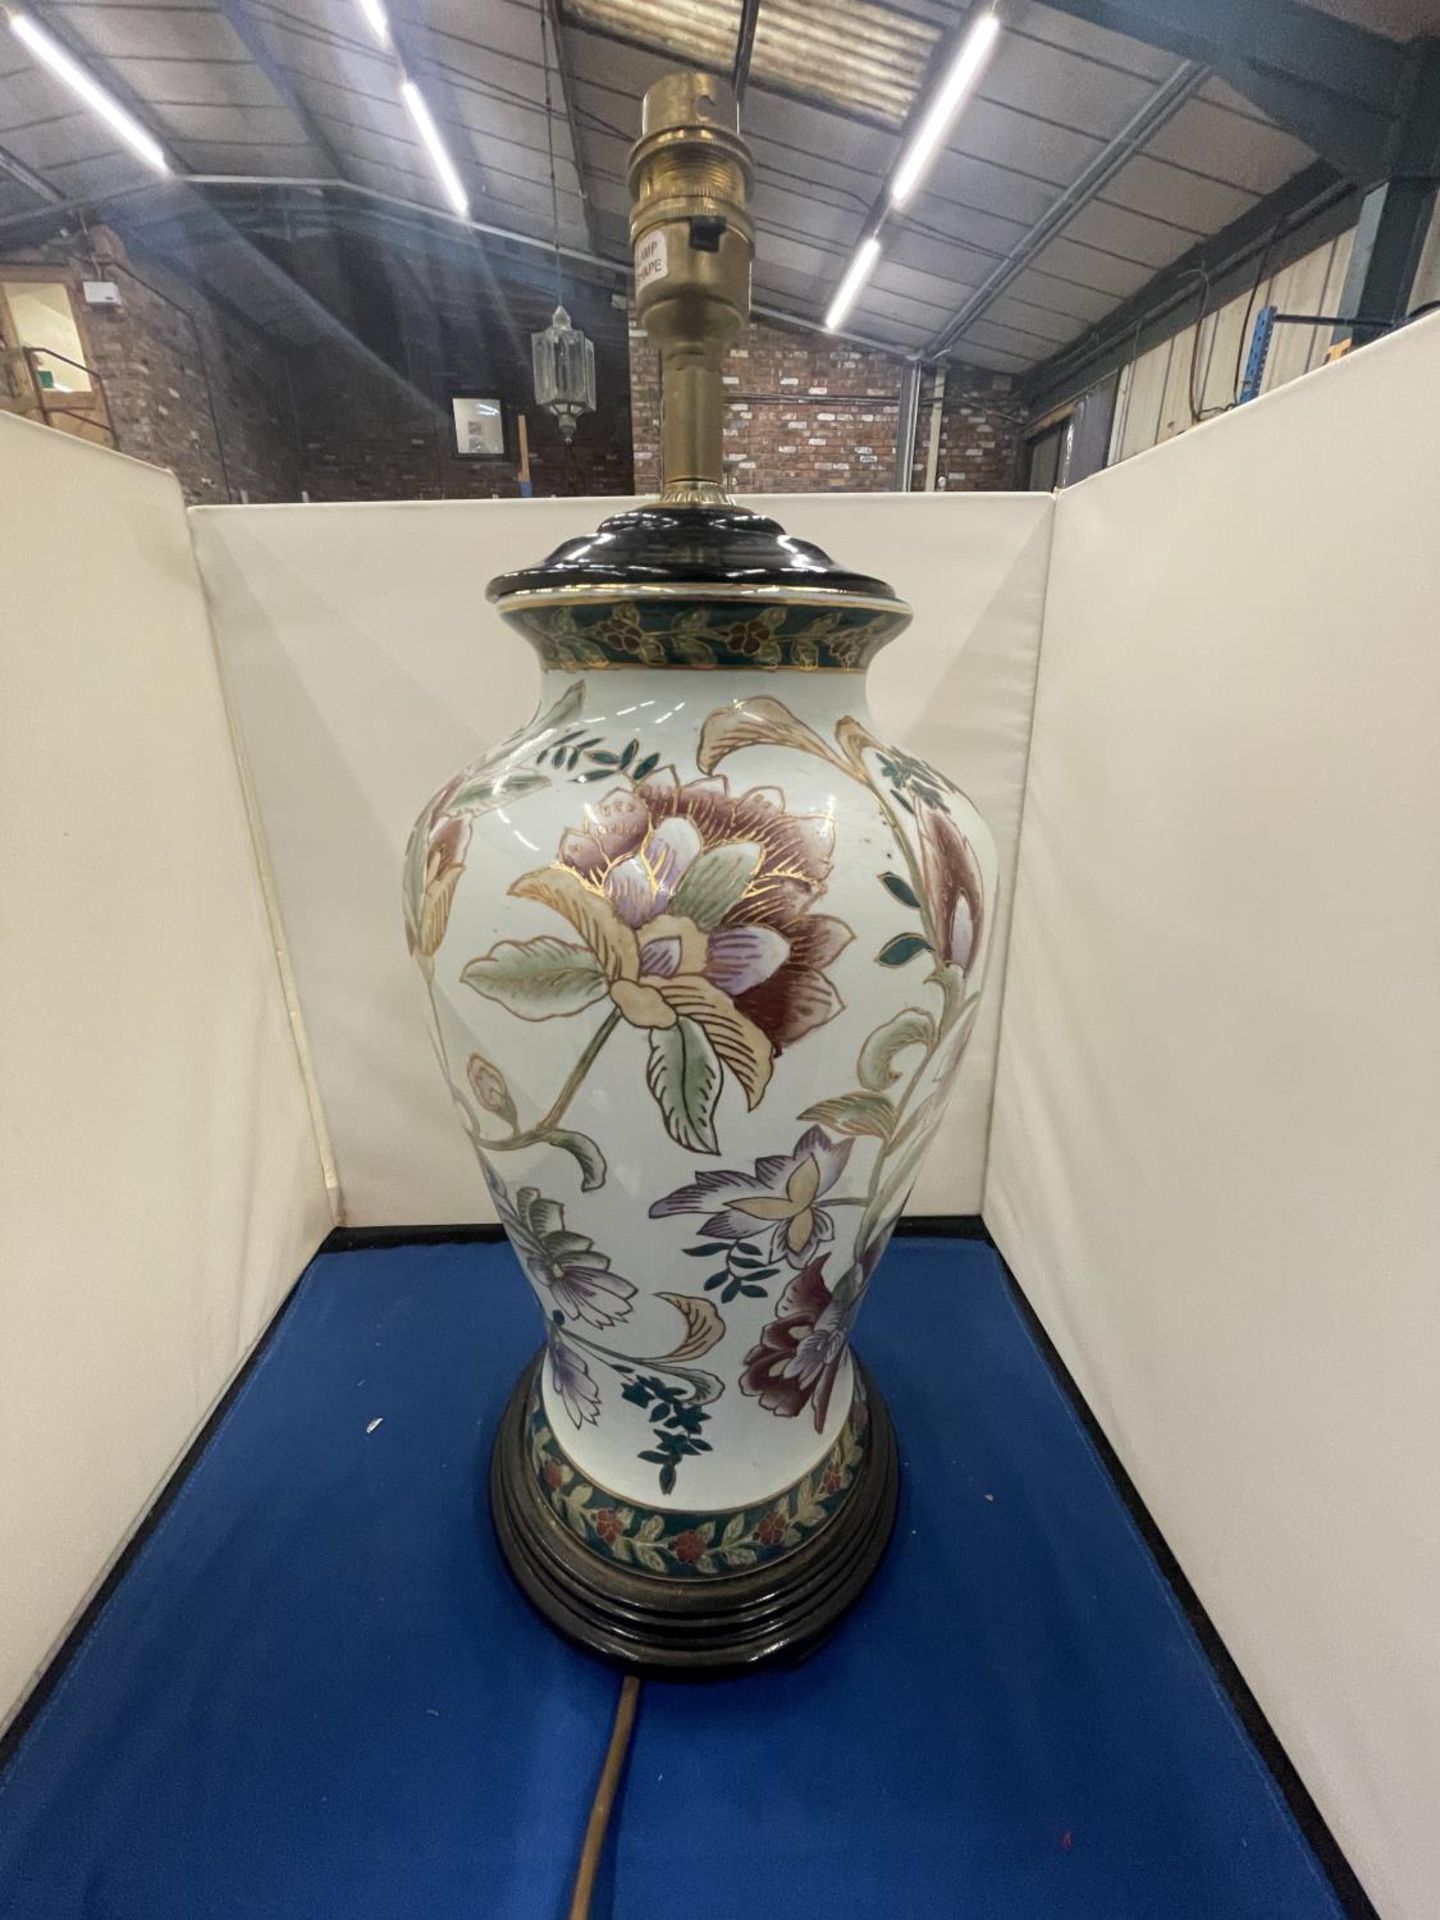 AN ORIENTAL STYLE CERAMIC TABLE LAMP ON A WOODEN BASE - Image 2 of 8